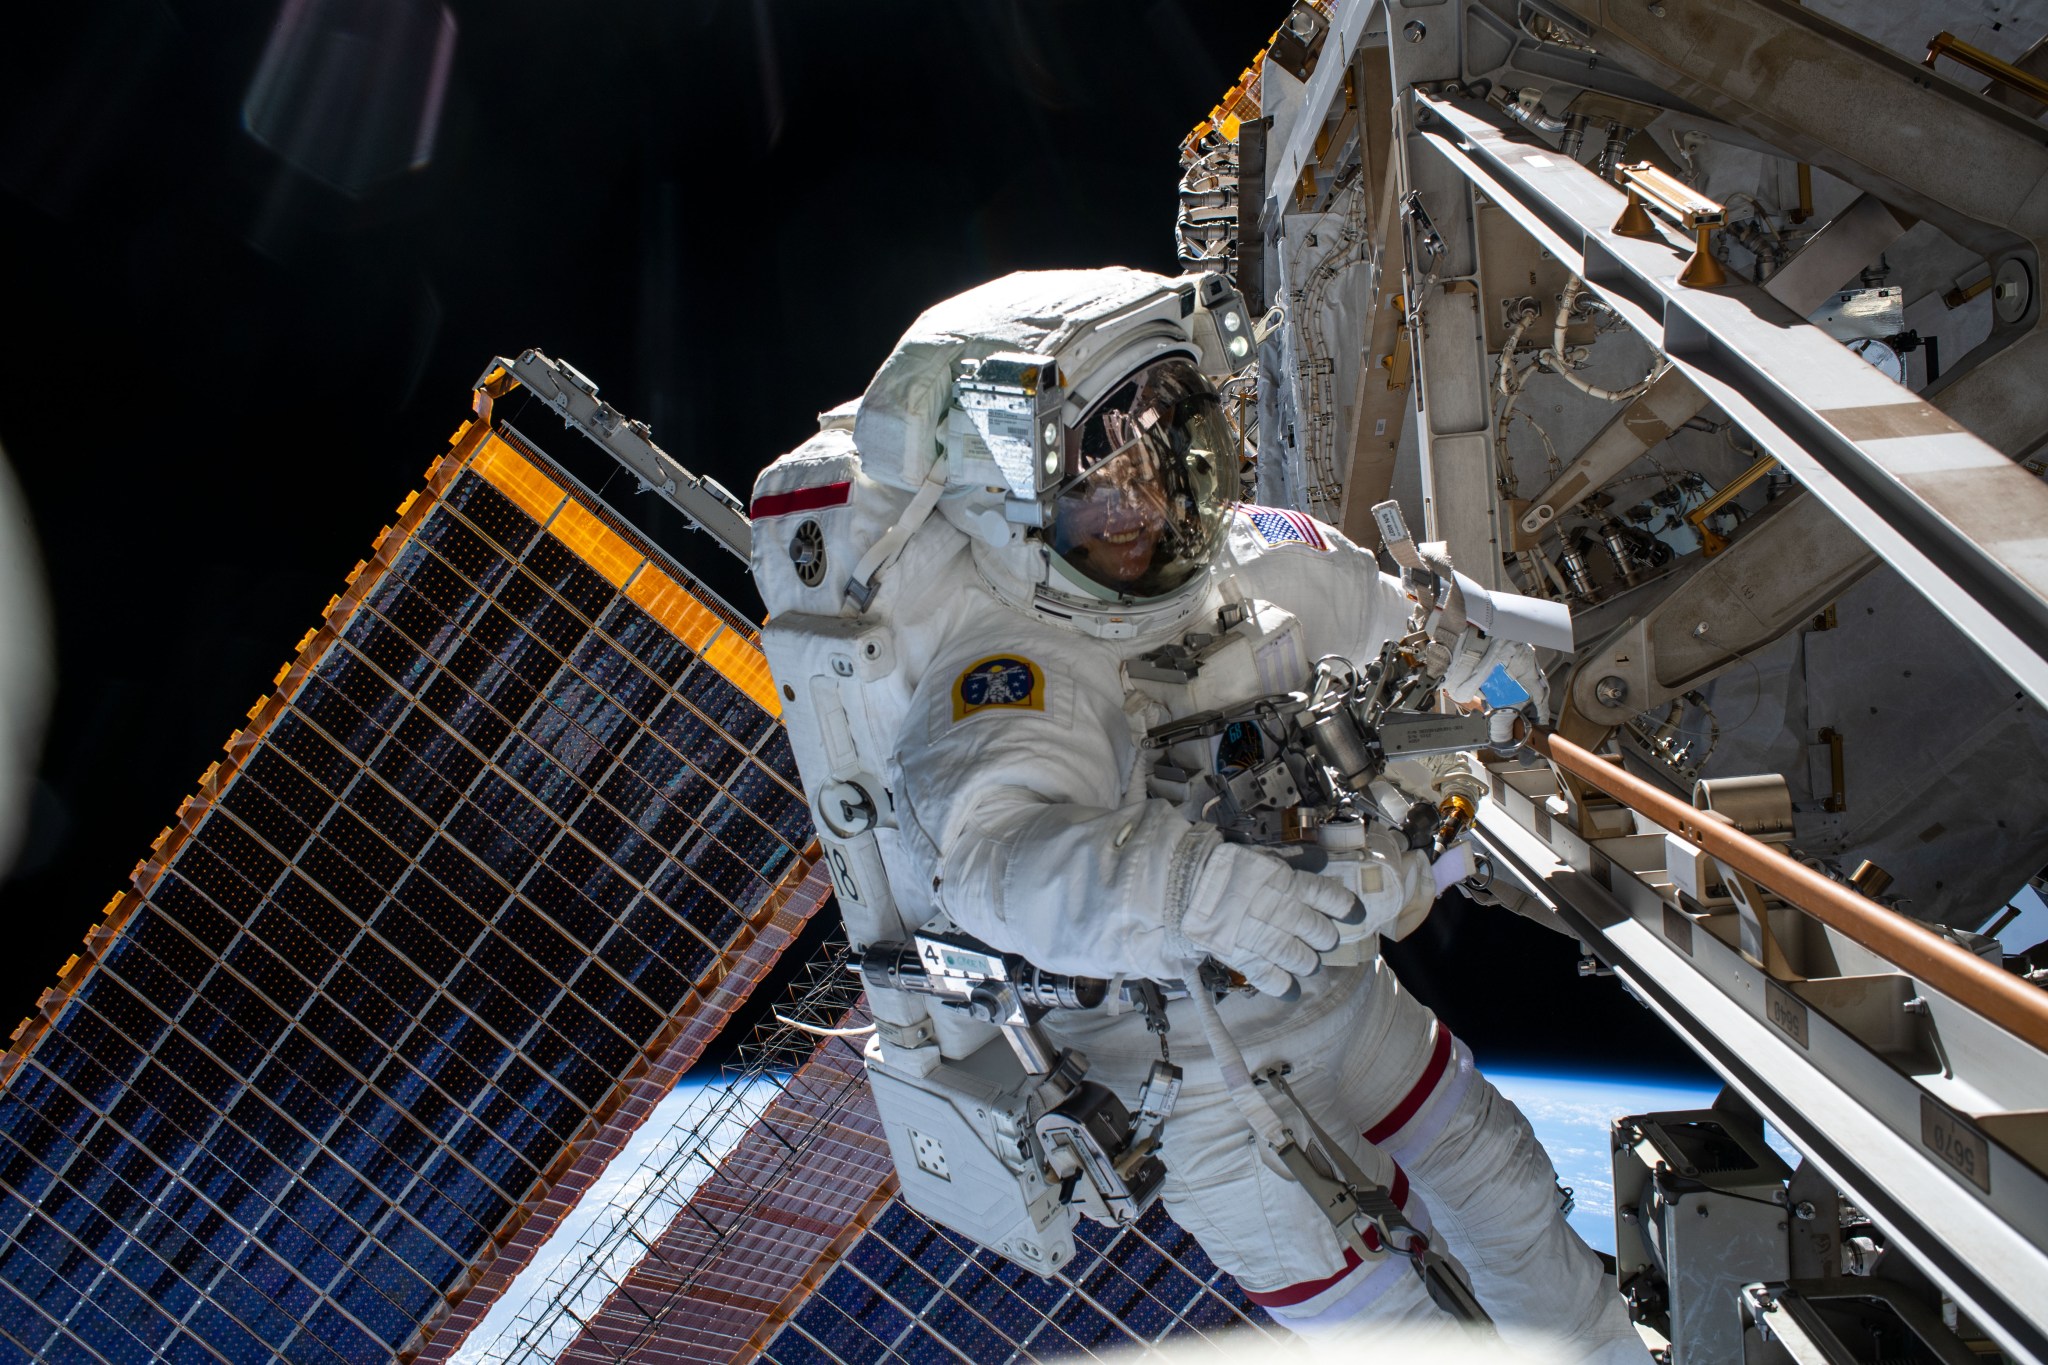 iss068e045241 (Feb. 2, 2023) --- NASA astronaut and Expedition 68 Flight Engineer Nicole Mann is pictured in her Extravehicular Mobility Unit, or spacesuit, during her second spacewalk. She and fellow spacewalker Koichi Wakata (out of frame) of the Japan Aerospace Exploration Agency (JAXA) installed a modification kit on the International Space Station's starboard truss structure that will enable the future installation of the orbiting lab's next roll-out solar array.